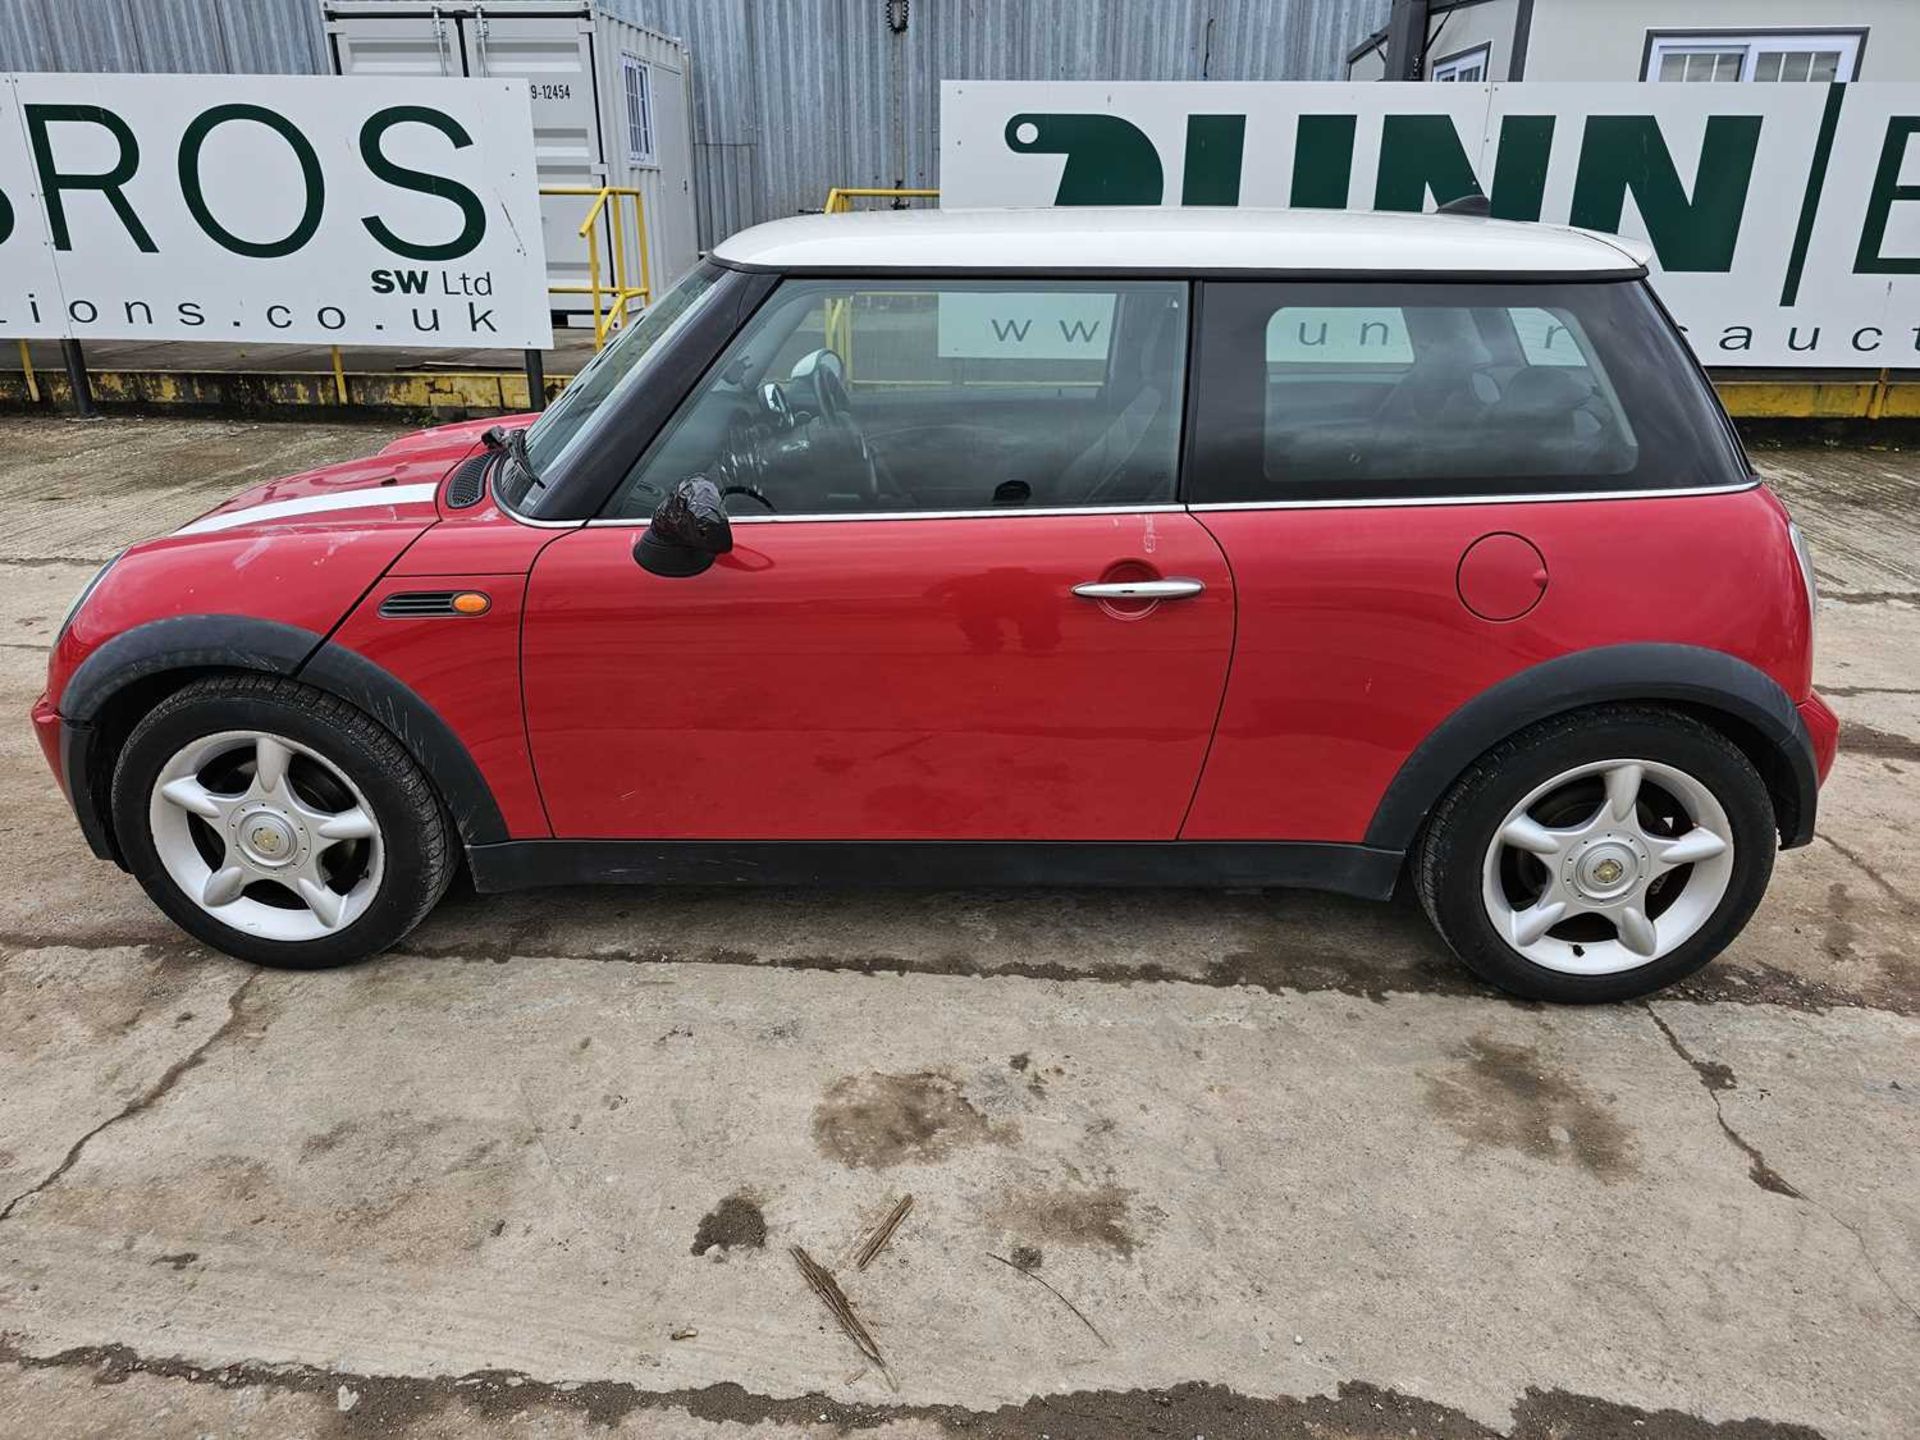 2005 Mini One, 5 Speed, Full Leather, A/C (Reg. Docs. Available) - Image 2 of 26